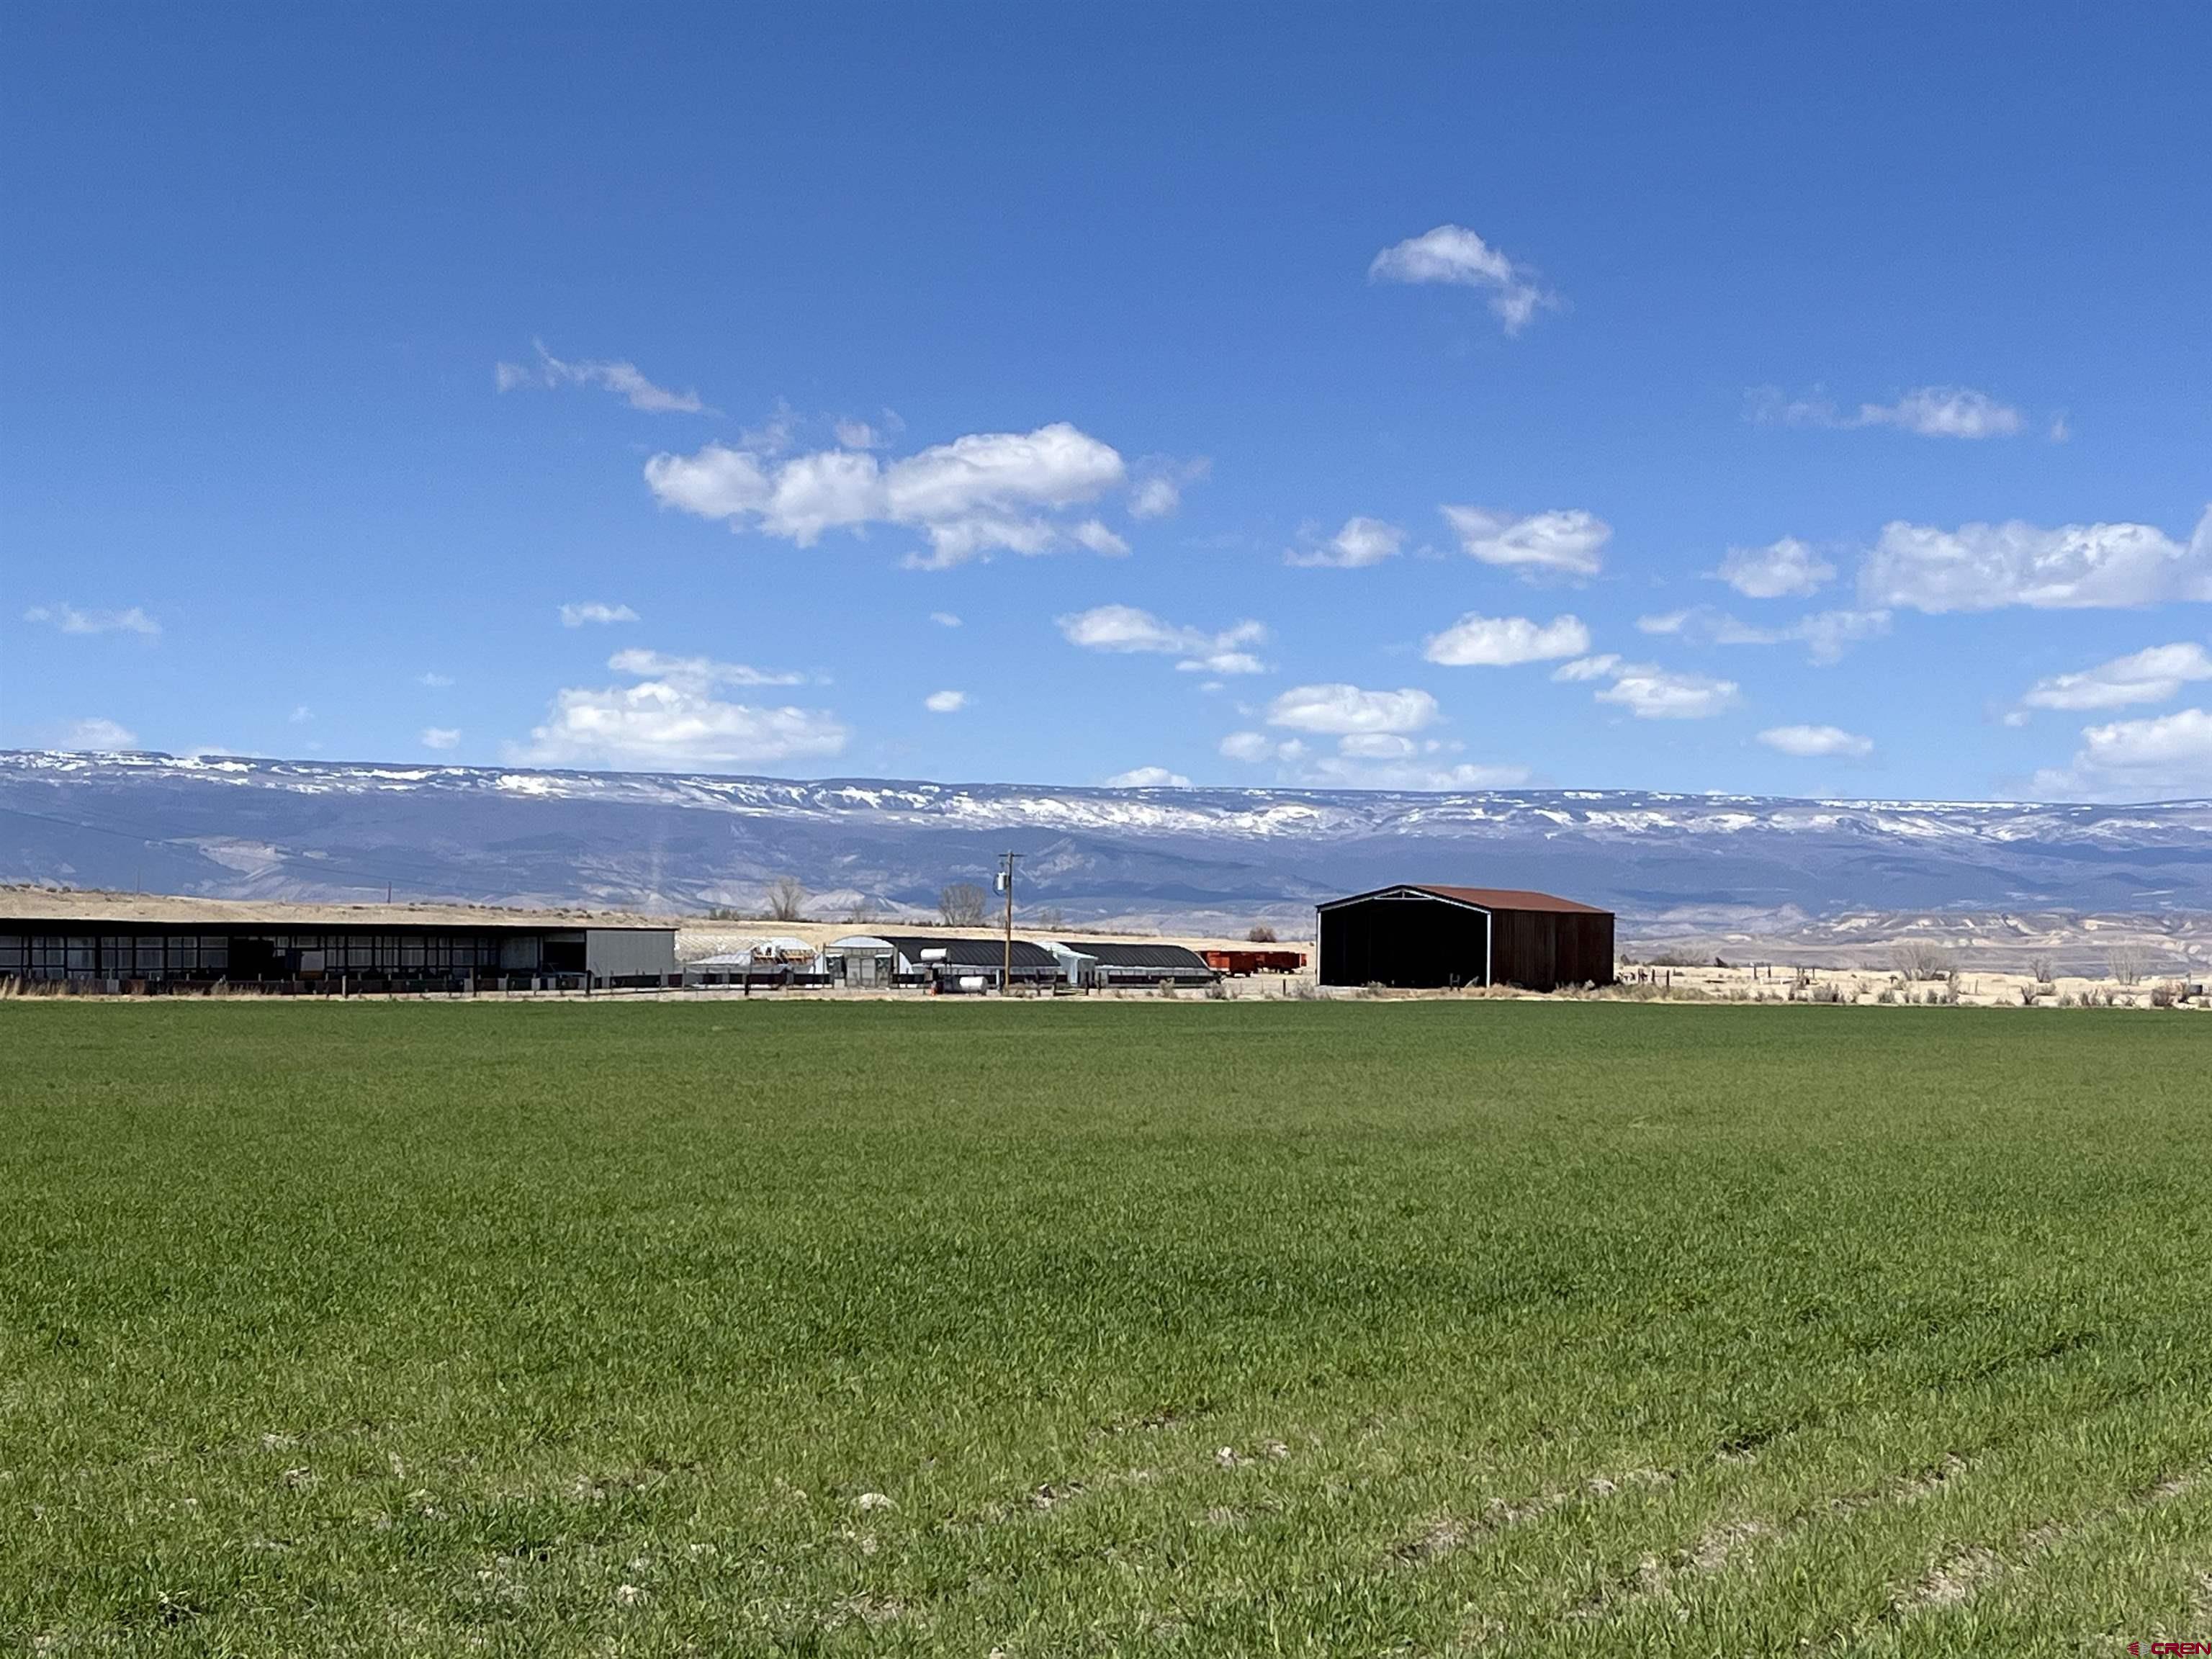 A secluded 50 acres east of Delta. The area is very quiet, it would make for a great spot for your new home. 20 irrigated acres with gated pipe. One Tri-County water tap. There's a really well built 50 x 150 metal shed that could be used for a variety of different things. Three 25 x100 green houses, 25 x 350 equipment shed that could double for livestock use and even graineries! This property has endless possibilities. The owner has 145 acres that join this property that could be purchased as well.